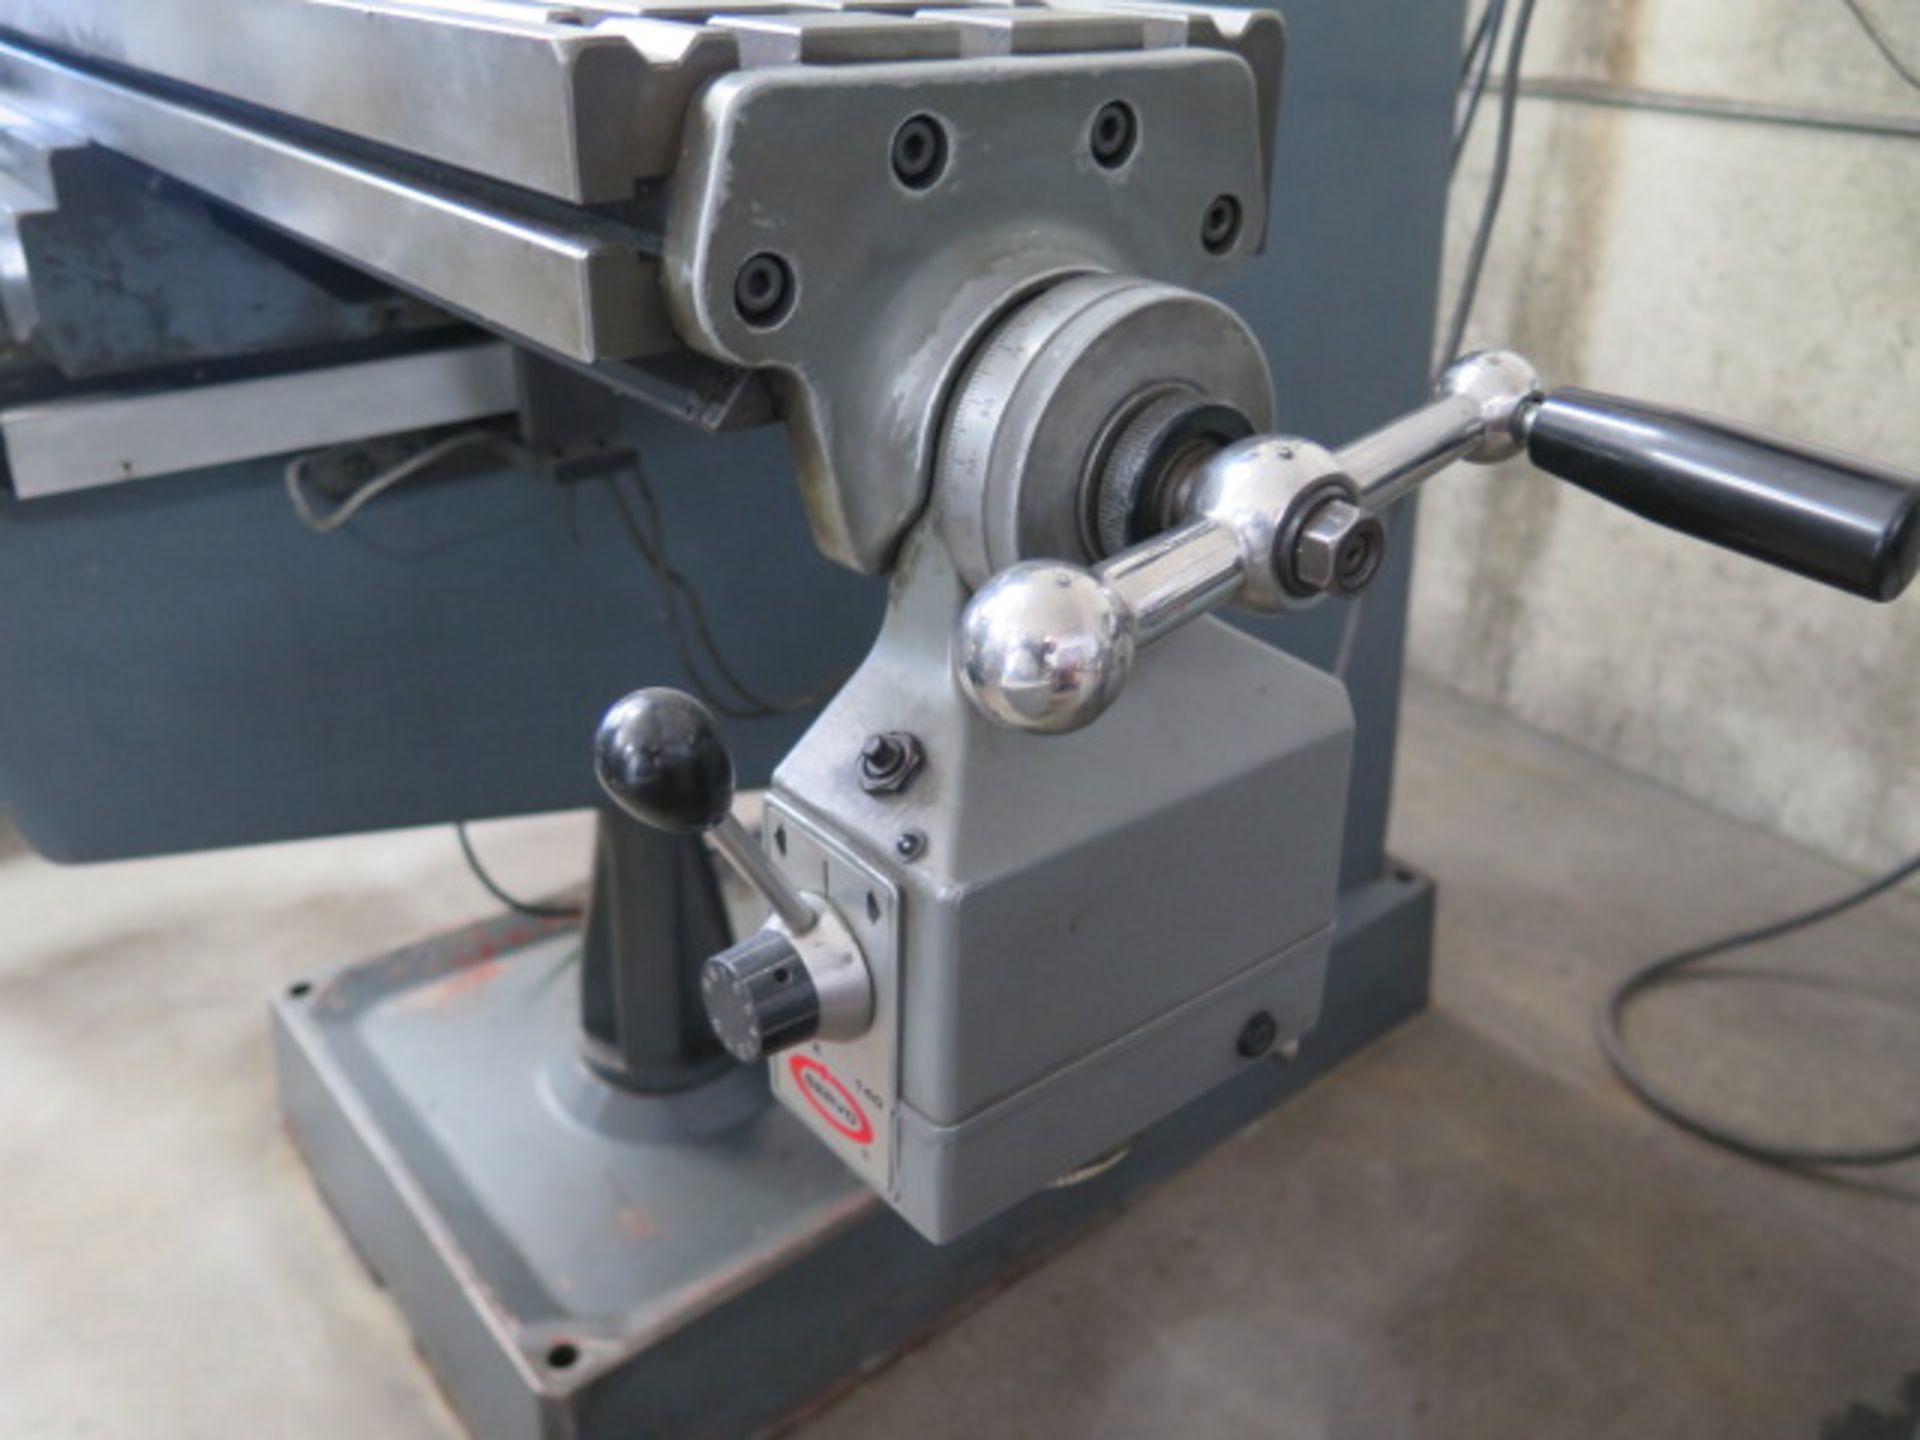 Lagun Vertical Mill s/n 11407 w/ Mitutoyo DRO, 2Hp Motor, 55-2940 RPM, 8-Spd, Chrome Ways,SOLD AS IS - Image 6 of 7